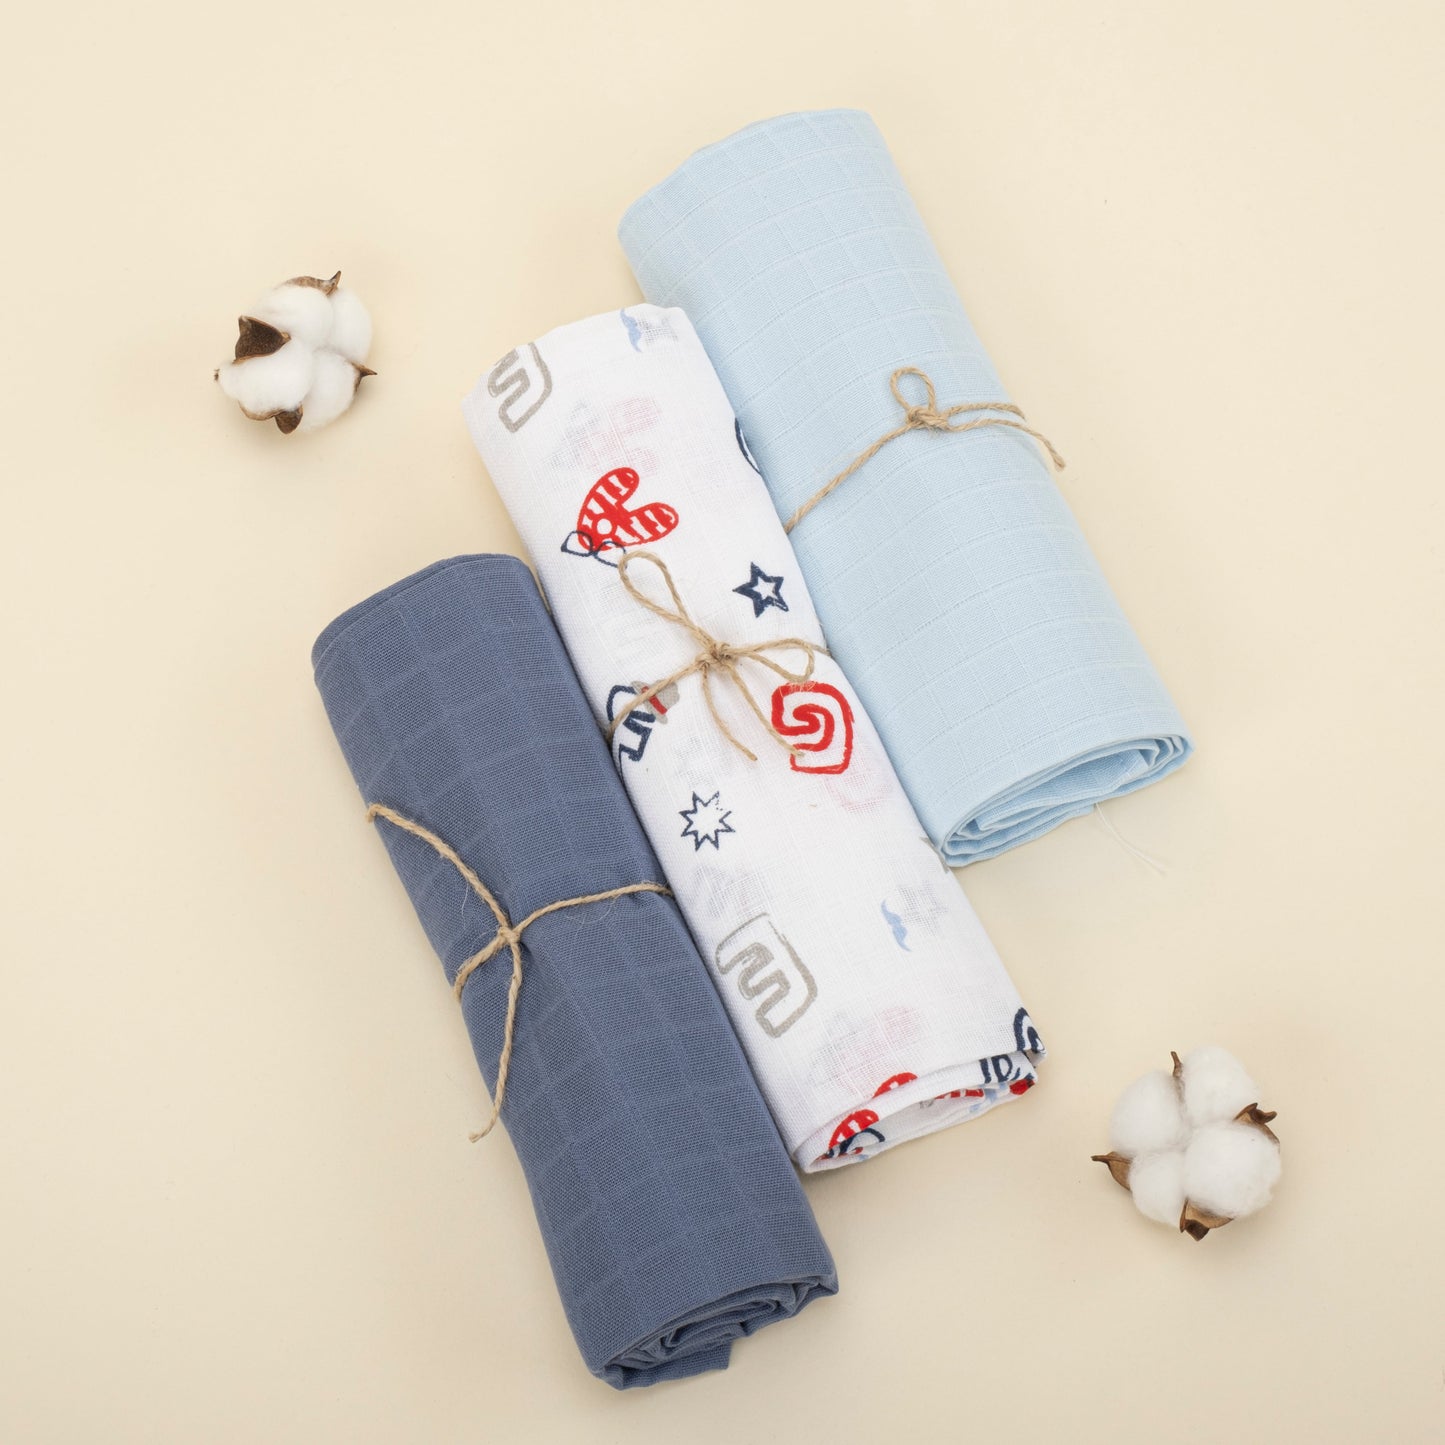 3 Piece Muslin Cover Set - Indigo / Lettered / Baby Blue